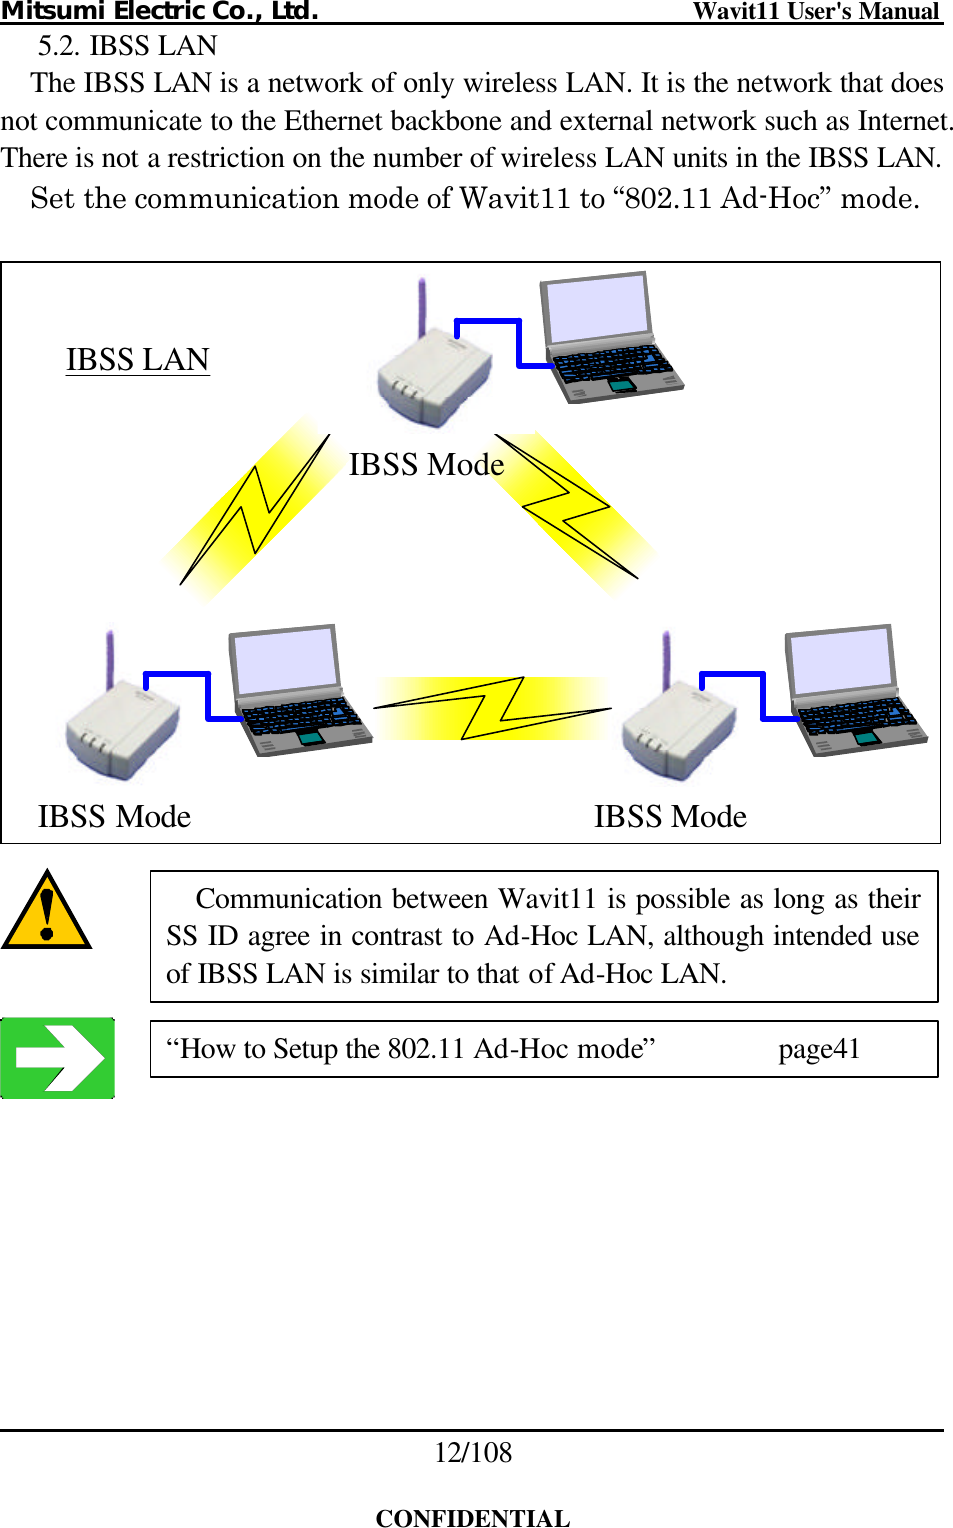 Mitsumi Electric Co., Ltd.                              Wavit11 User&apos;s Manual 12/108  CONFIDENTIAL 5.2. IBSS LAN The IBSS LAN is a network of only wireless LAN. It is the network that does not communicate to the Ethernet backbone and external network such as Internet. There is not a restriction on the number of wireless LAN units in the IBSS LAN. Set the communication mode of Wavit11 to “802.11 Ad-Hoc” mode.  IBSS ModeIBSS ModeIBSS ModeIBSS LAN     Communication between Wavit11 is possible as long as their SS ID agree in contrast to Ad-Hoc LAN, although intended use of IBSS LAN is similar to that of Ad-Hoc LAN. “How to Setup the 802.11 Ad-Hoc mode”    page41 